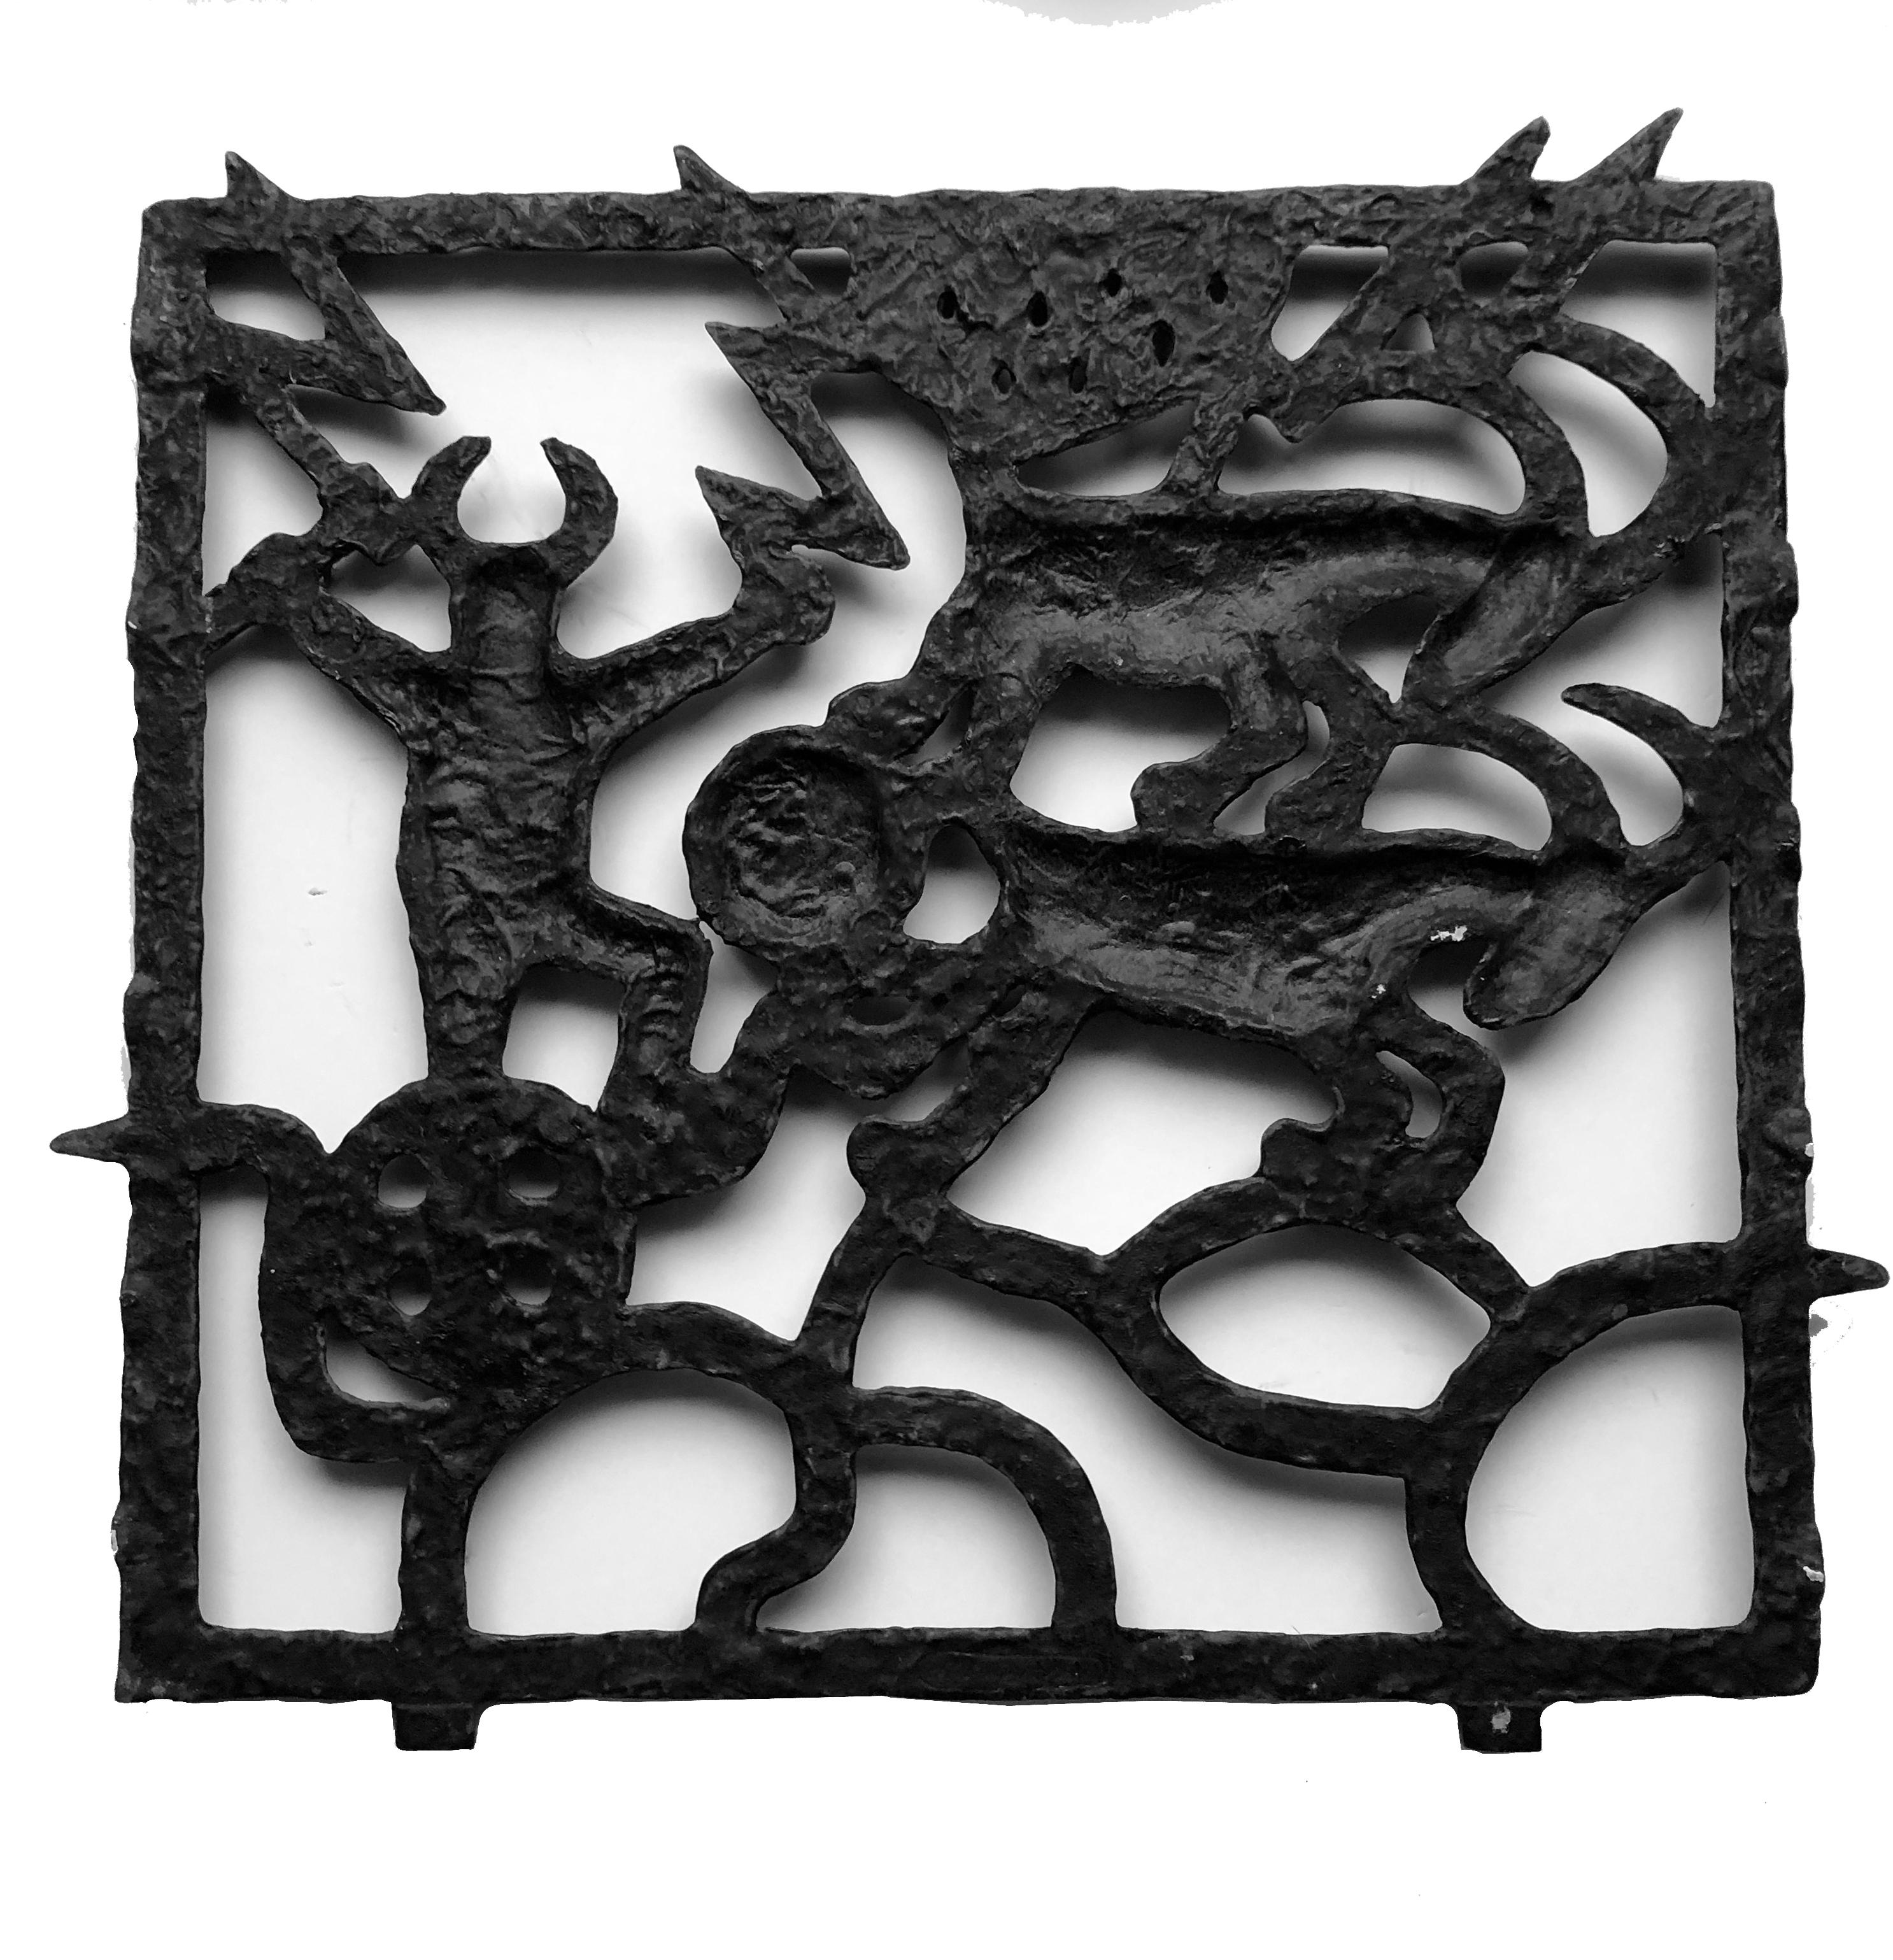 Midcentury Swedish fireplace screen by Olle Hermansson for Husqvarna. 
Note. This screen is wall-mounted, unlike the freestanding ones. A cast iron fireplace with a theme from the nordic mythology. We can see Thor (Tor) and his running goats and the